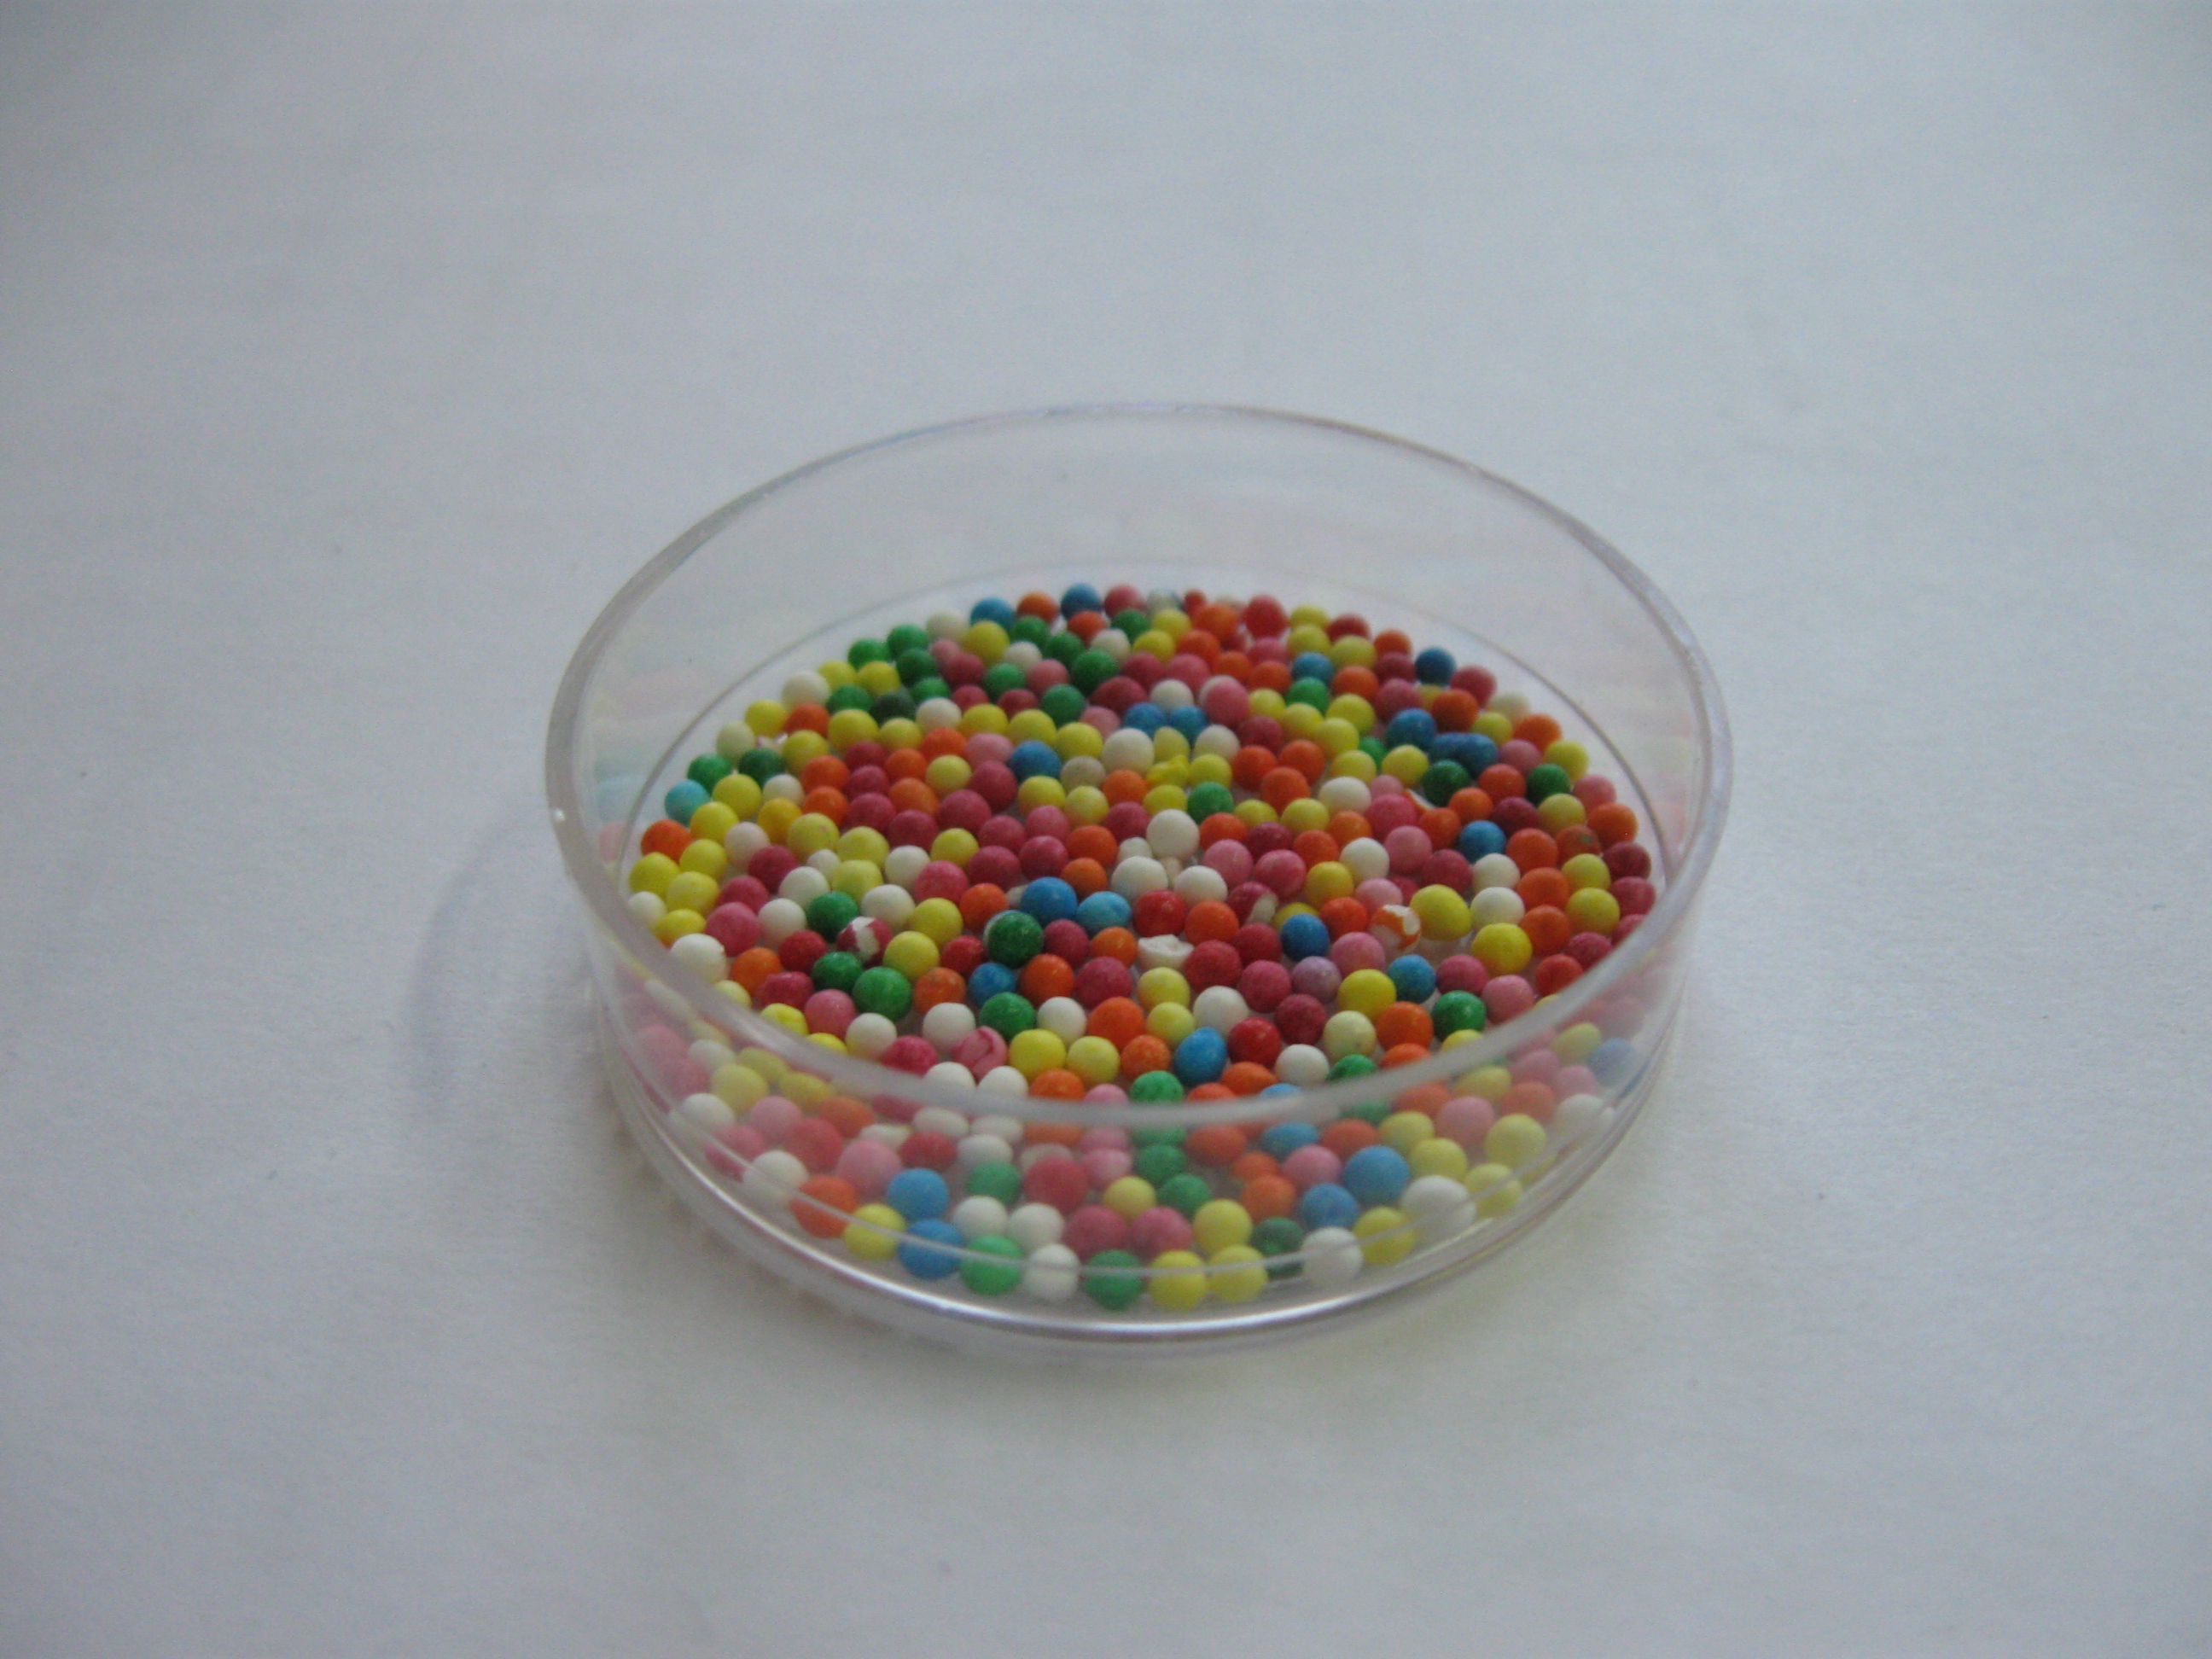 Sample of Self-ordering of Christmas Cake Balls Decoration in Petri dish. Image Credit--D. Bychanok/ Research Institute for Nuclear Problems BSU, Belarus